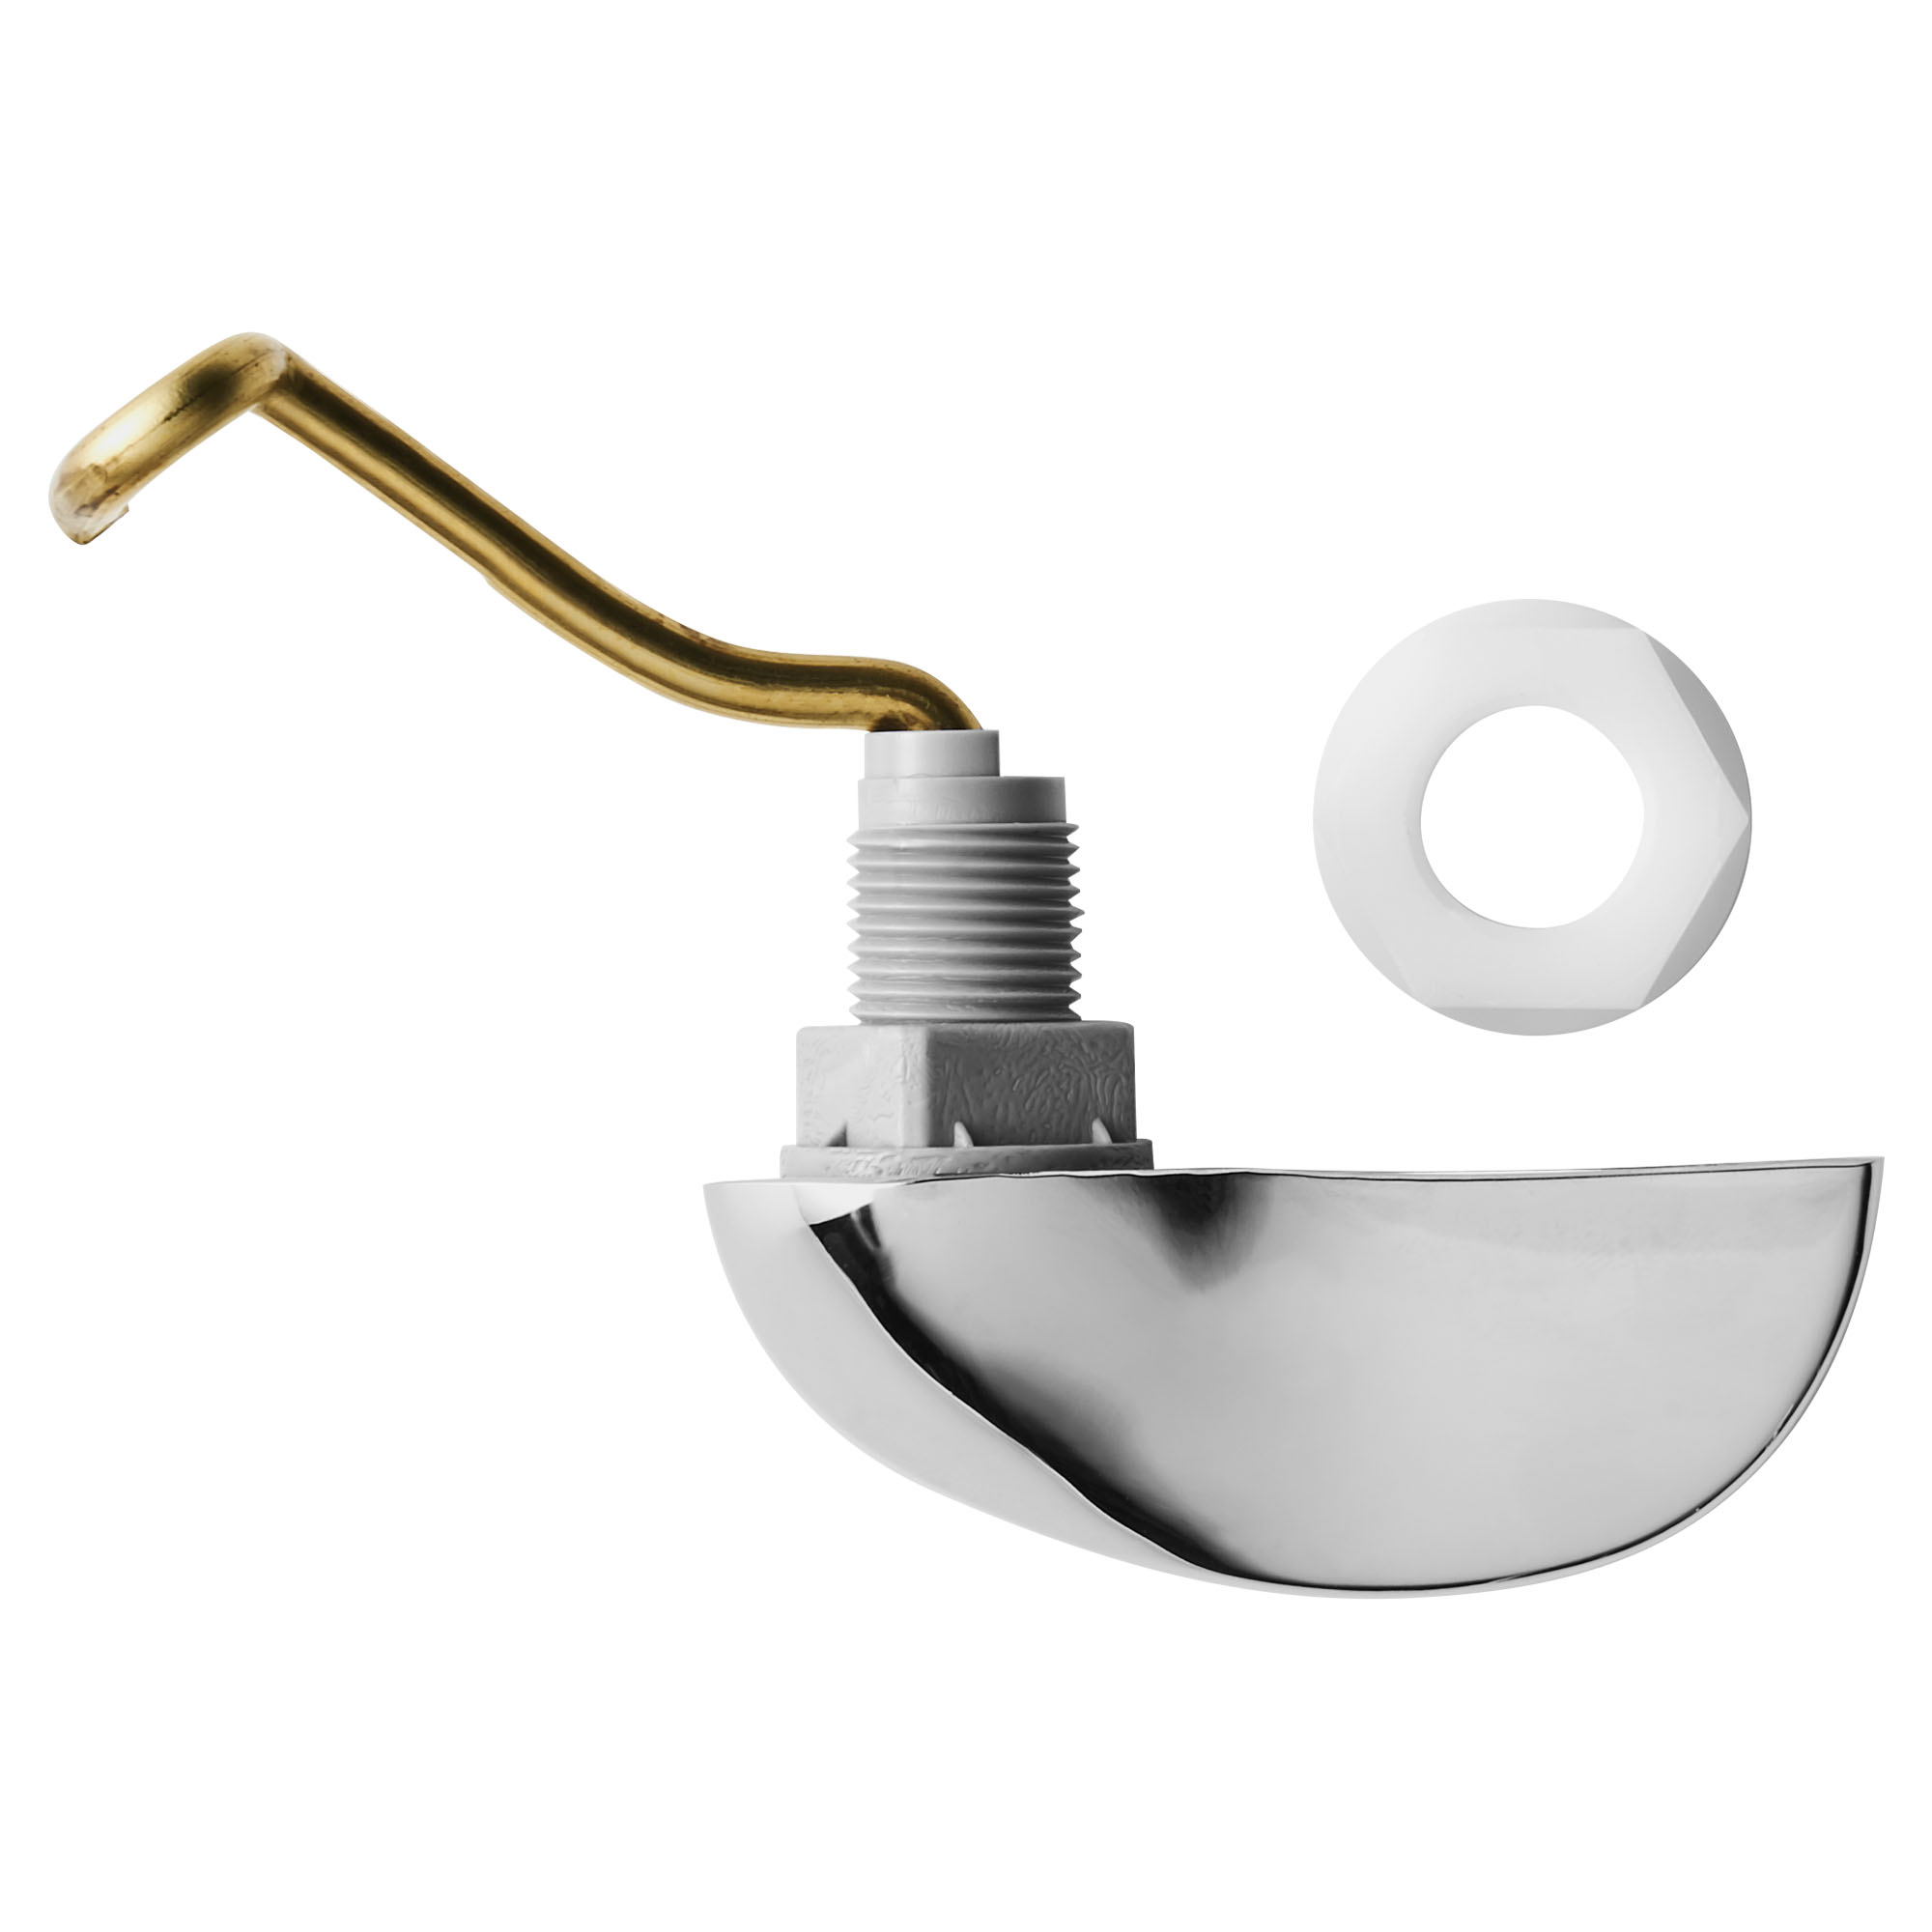 Left Hand Trip Lever Assembly for Pressure Assist Toilet Tanks